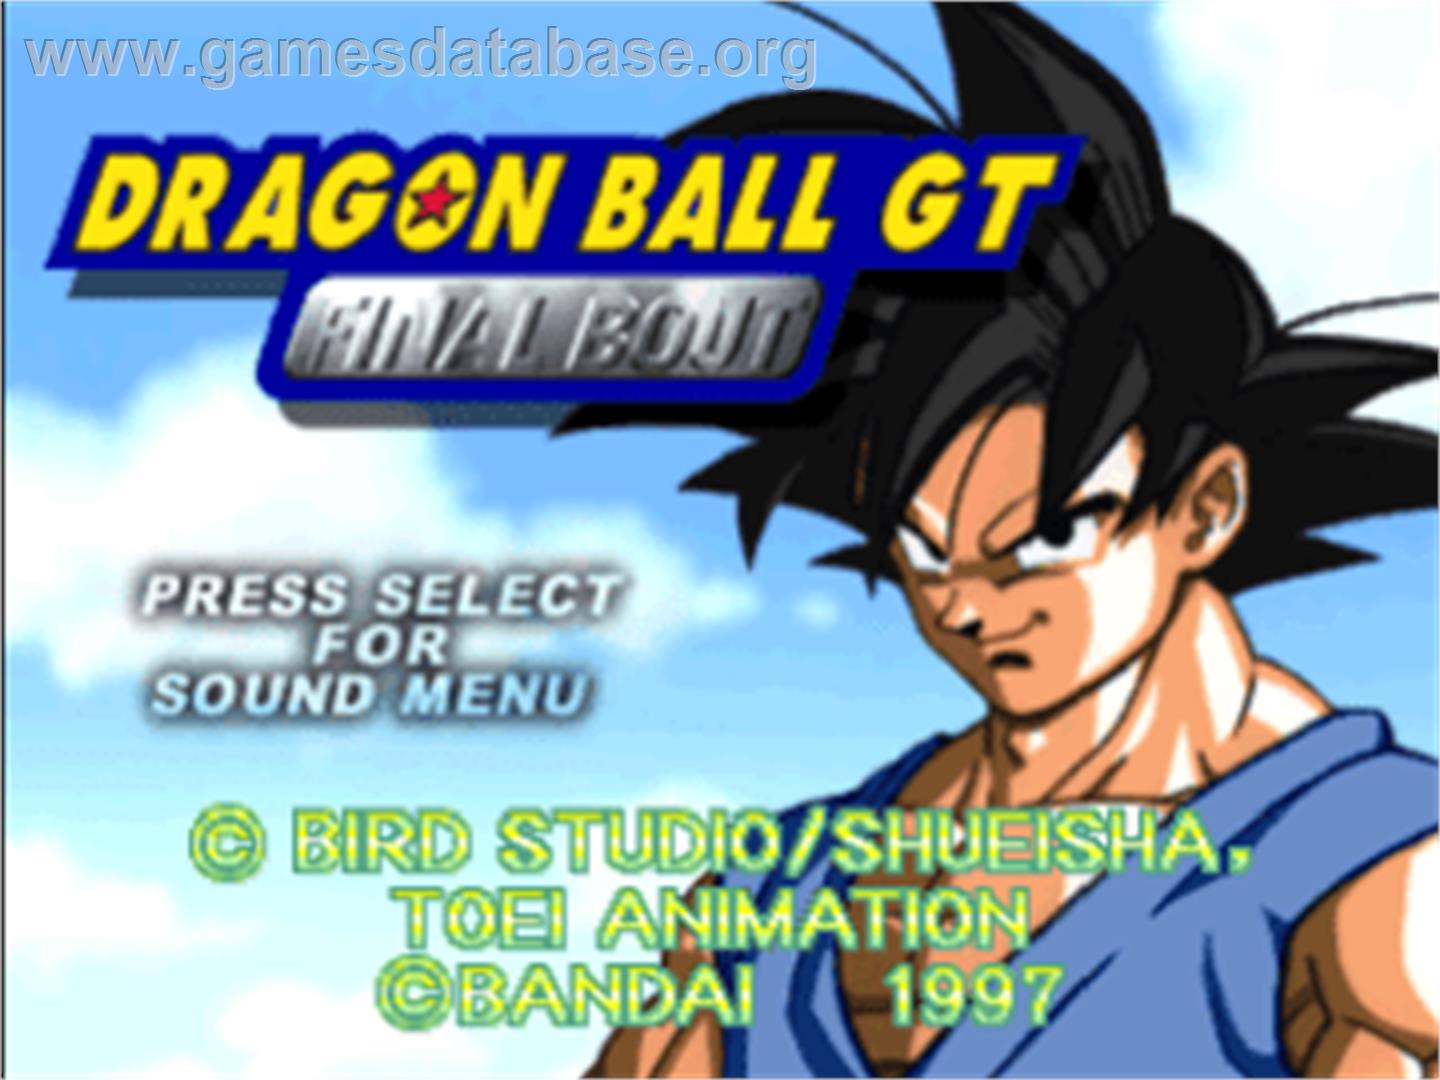 Dragon Ball GT: Final Bout - Sony Playstation - Artwork - Title Screen